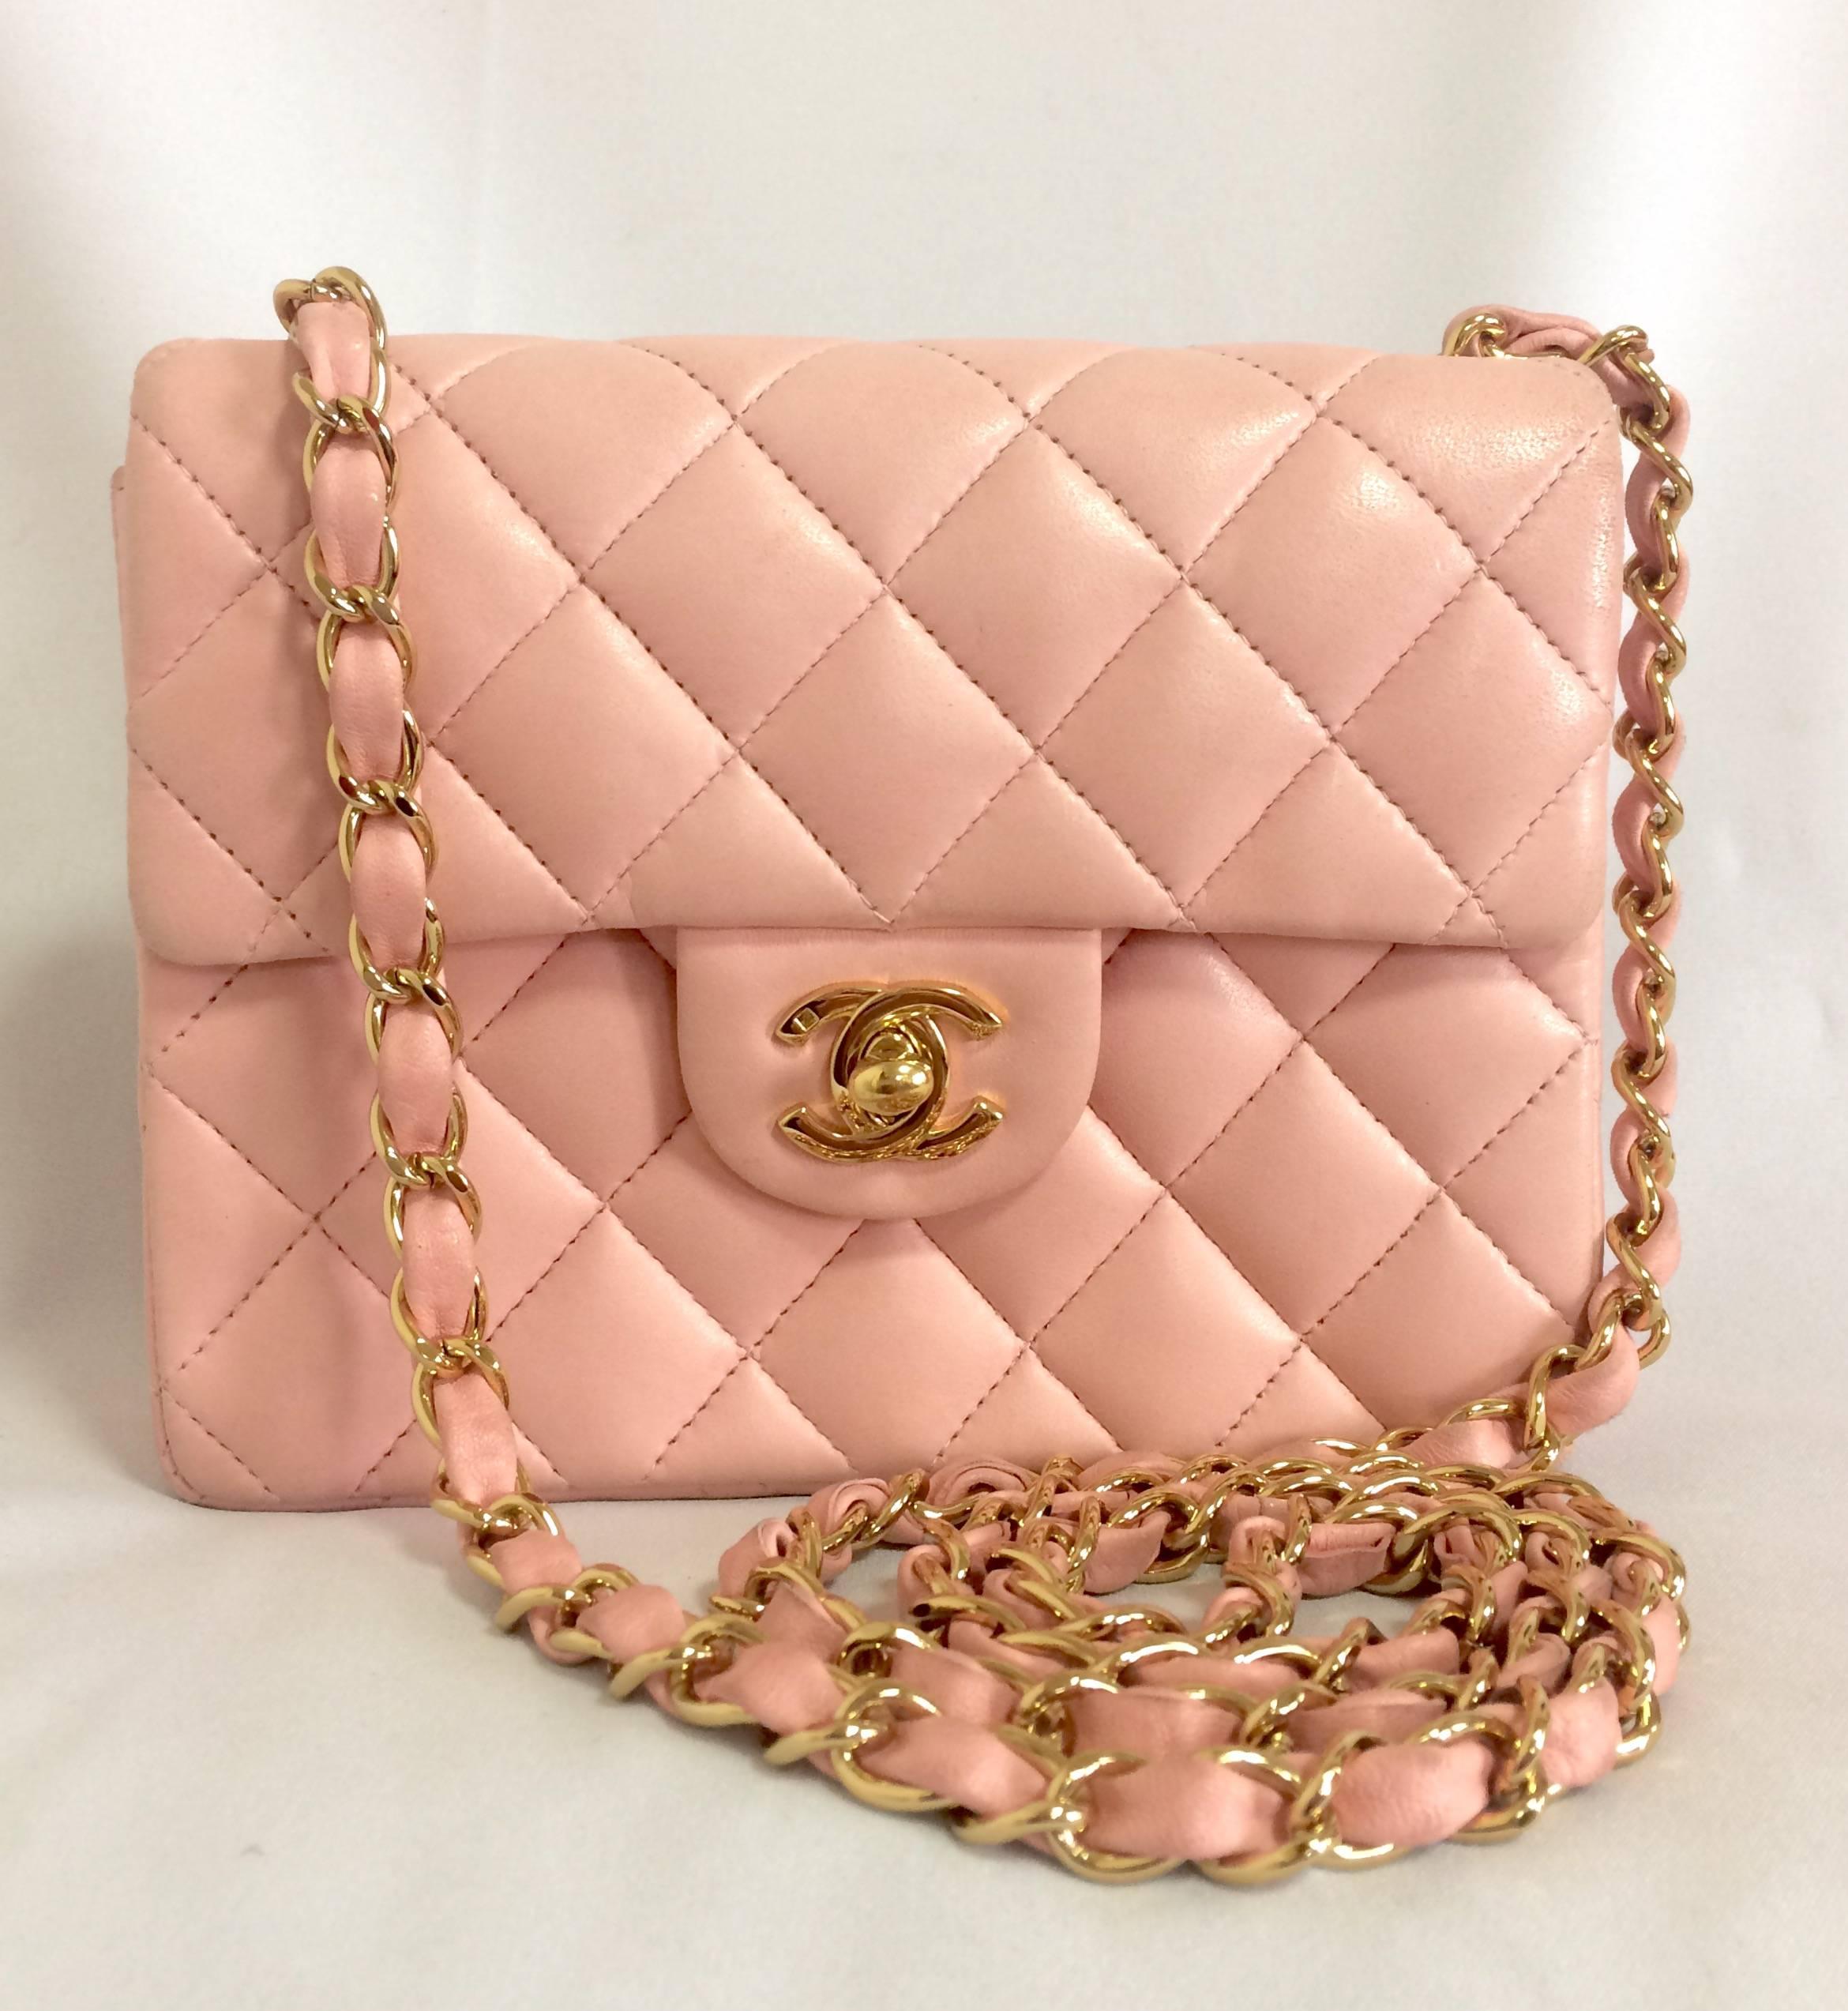 Vintage CHANEL milky pink lamb leather flap chain shoulder bag, classic 2.55 mini purse with gold tone CC closure.

Introducing one of the most popular pieces from CHANEL back in the era, vintage Chanel pink lamb leather shoulder bag with golden CC